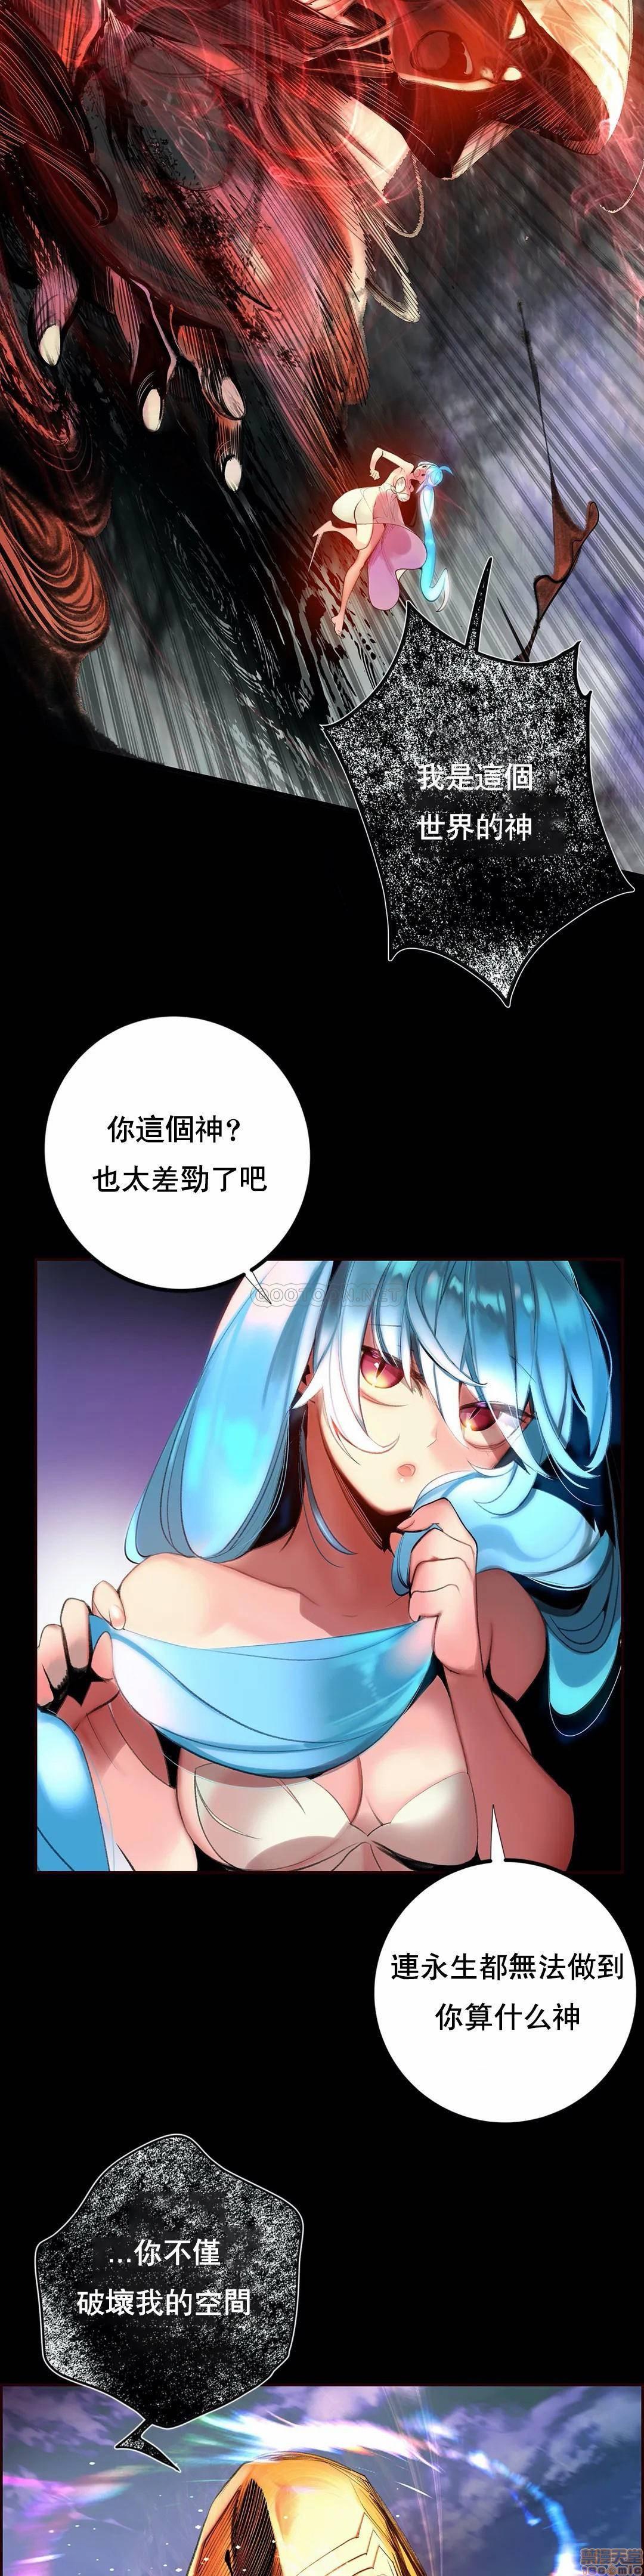 [Juder] Lilith`s Cord (第二季) Ch.77-93 end [Chinese] 229